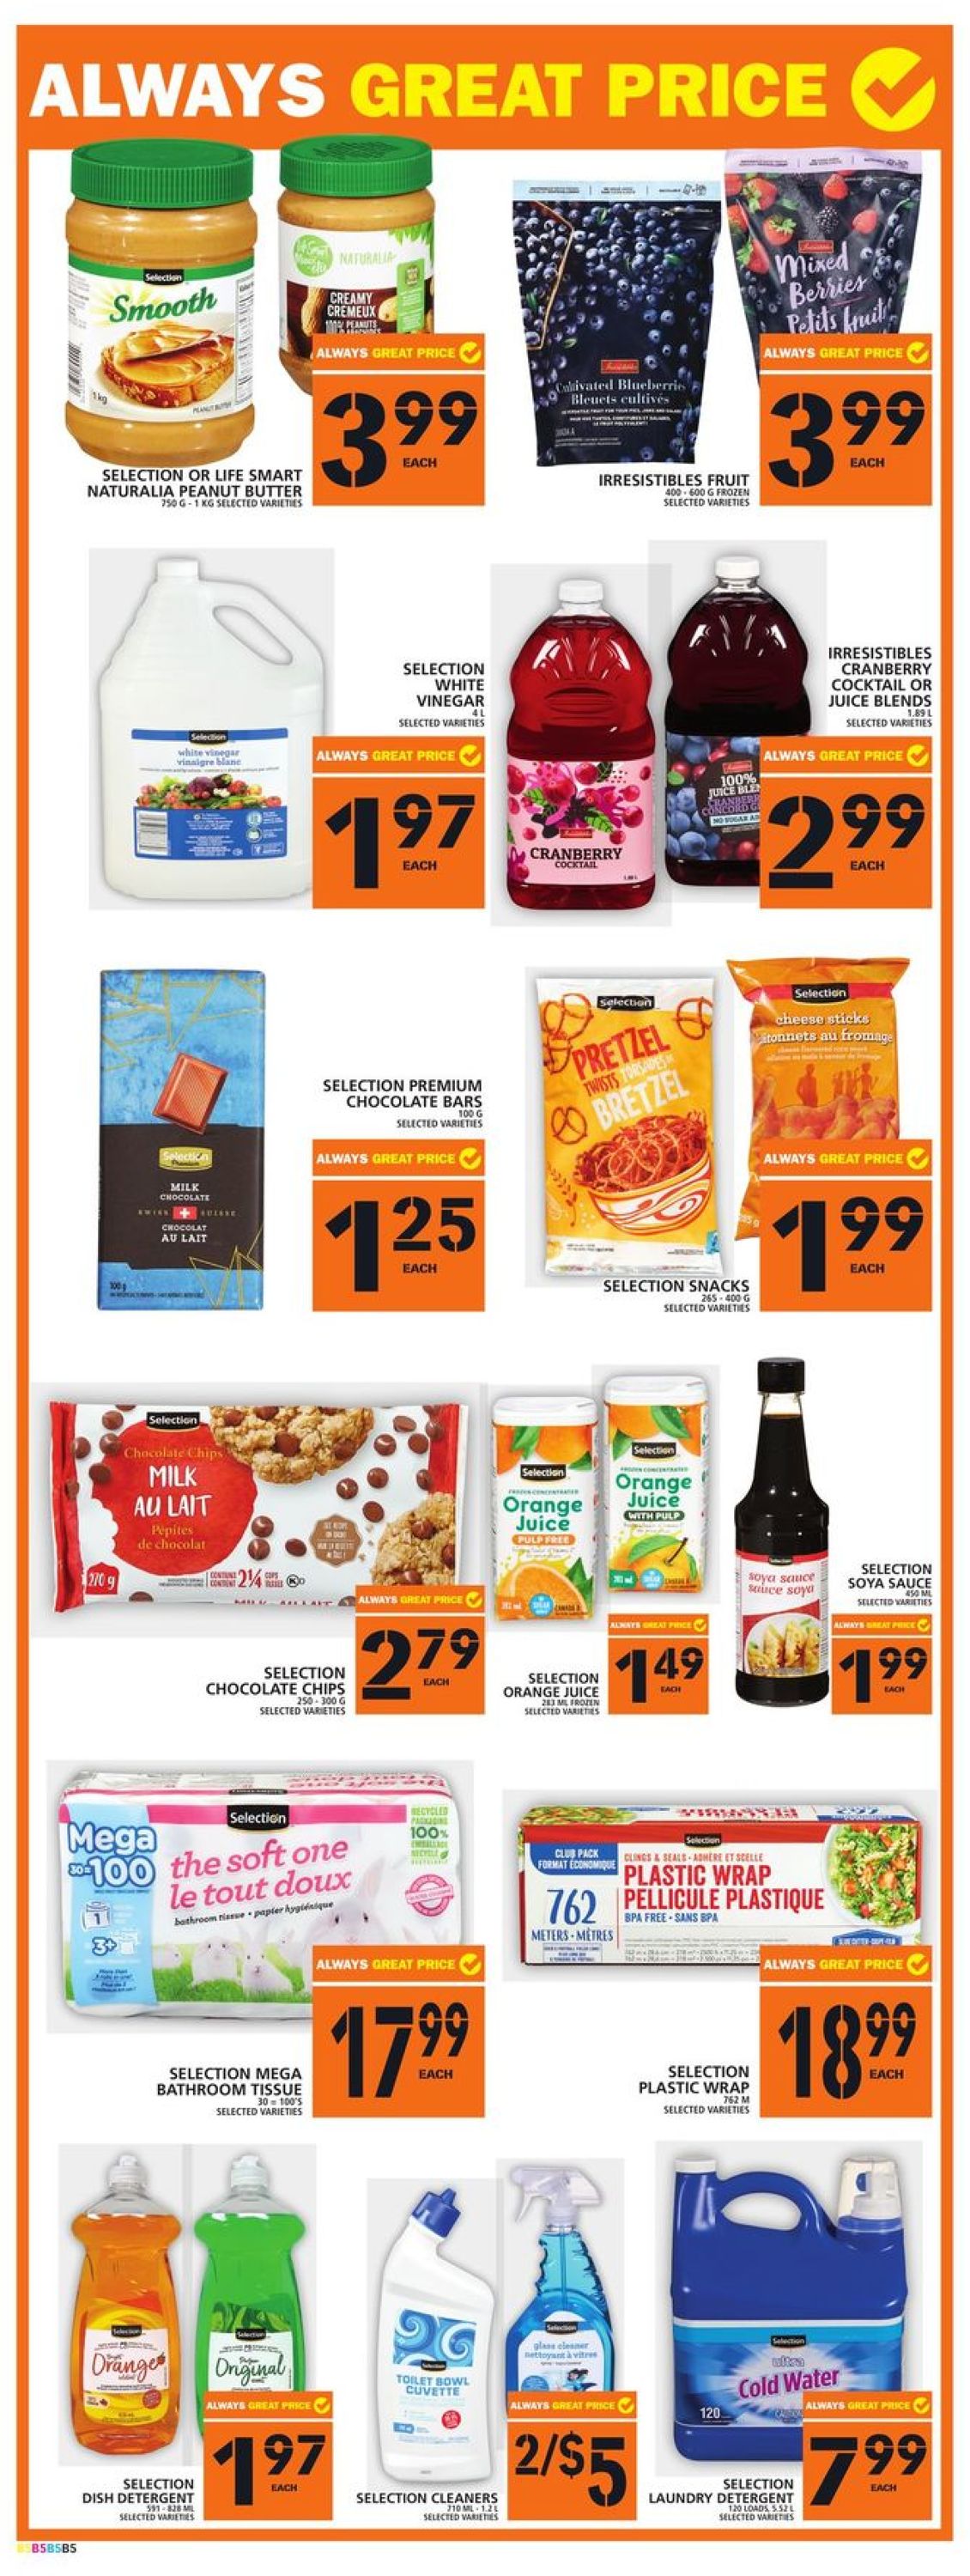 Food Basics Flyer from 08/18/2022